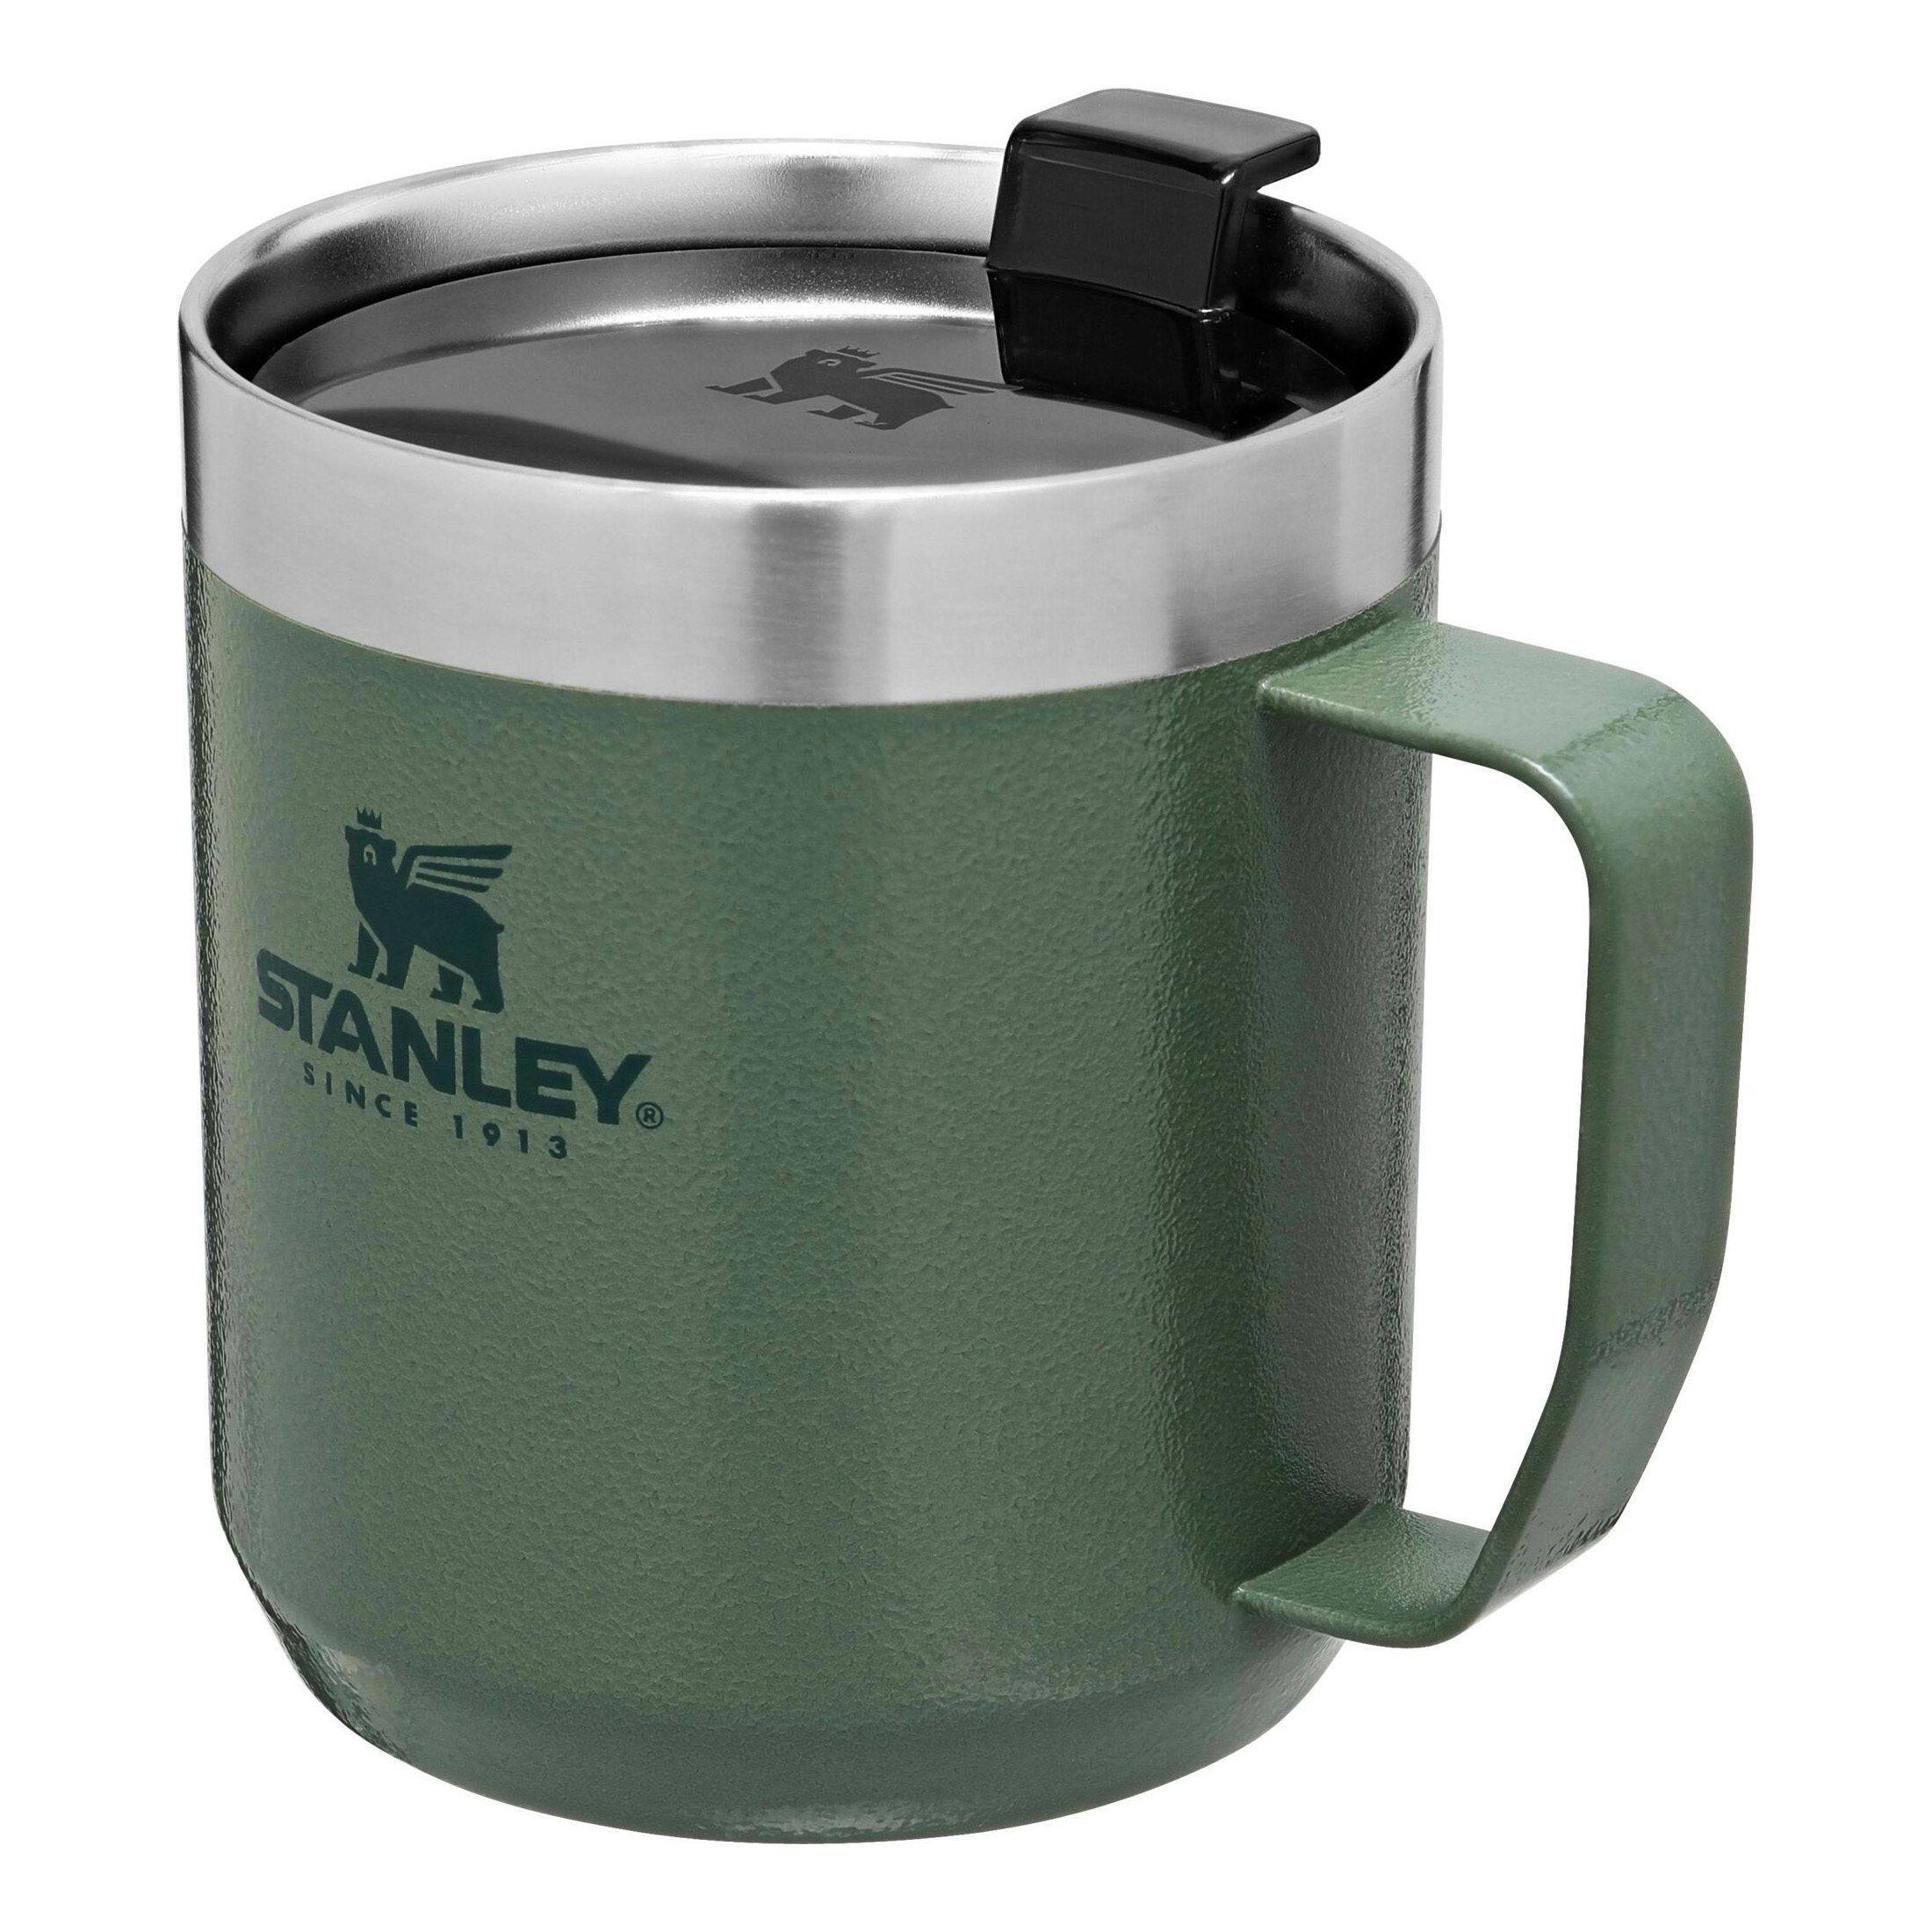 Stanley Camp Cook Set -24 Oz Kettle with 2 Cups -Vented Lids -Locking Handle